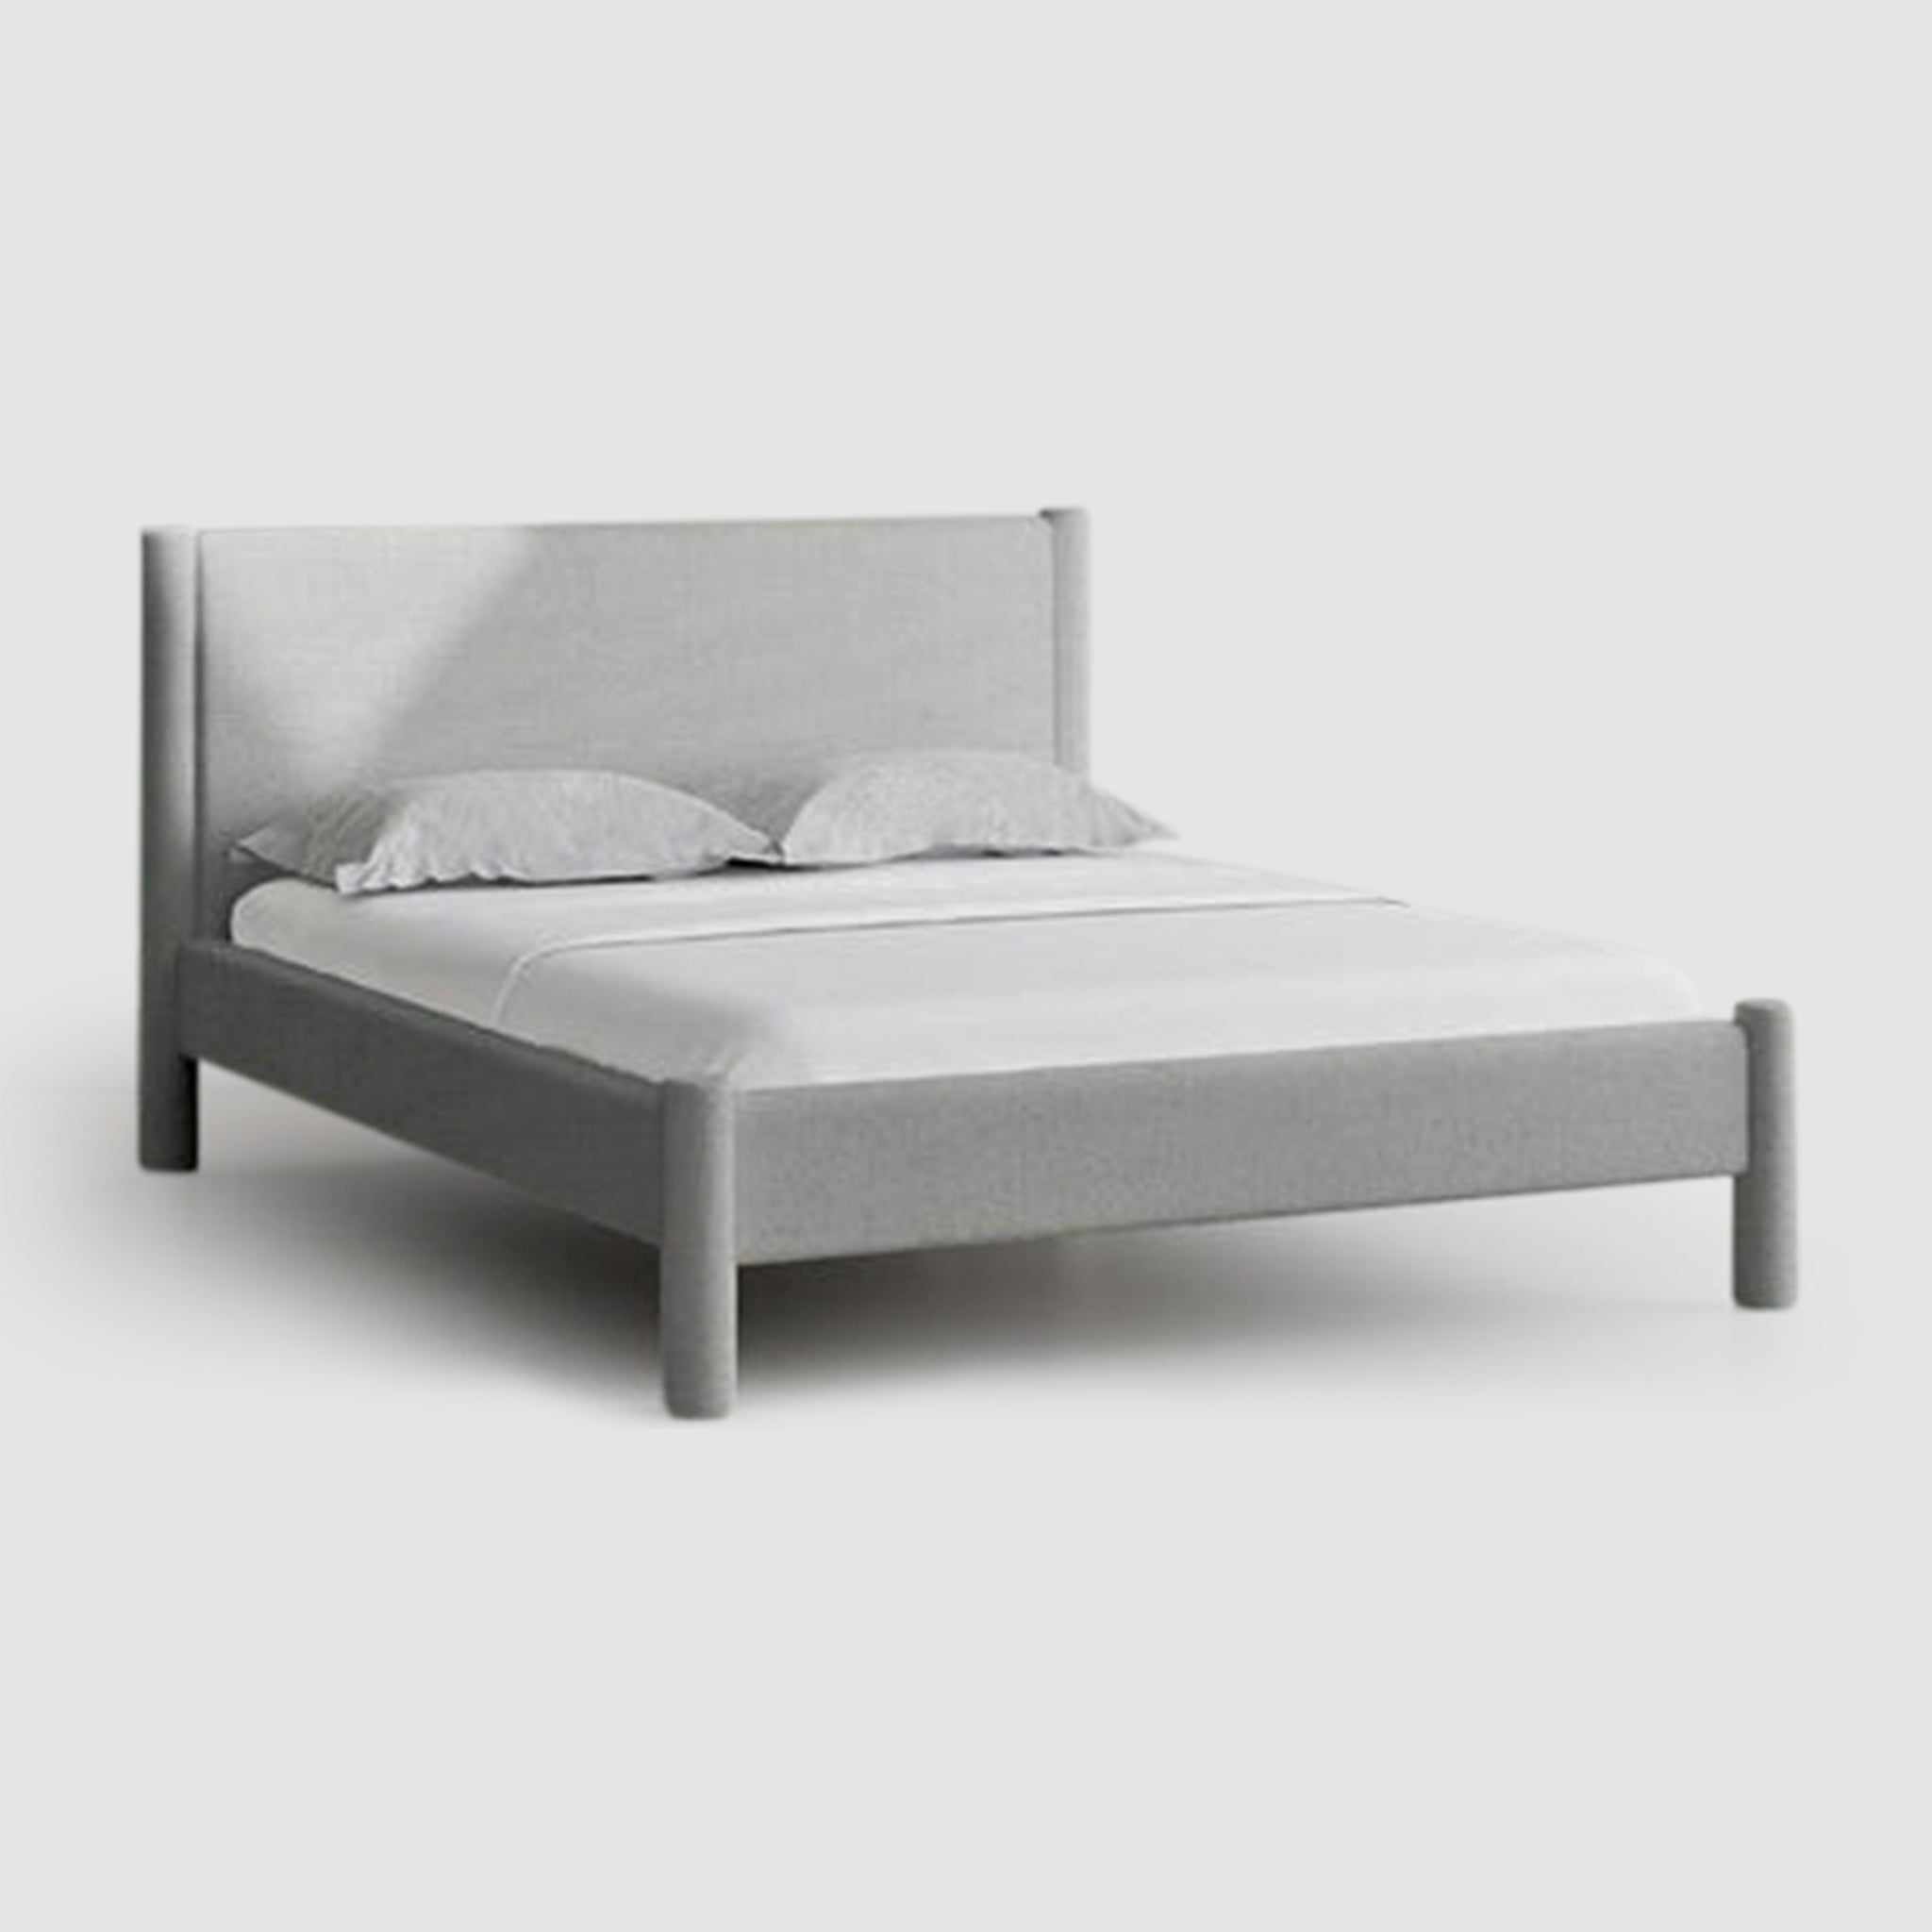 The Carrie Bed with solid beech wood frame and legs, perfect for modern bedrooms.